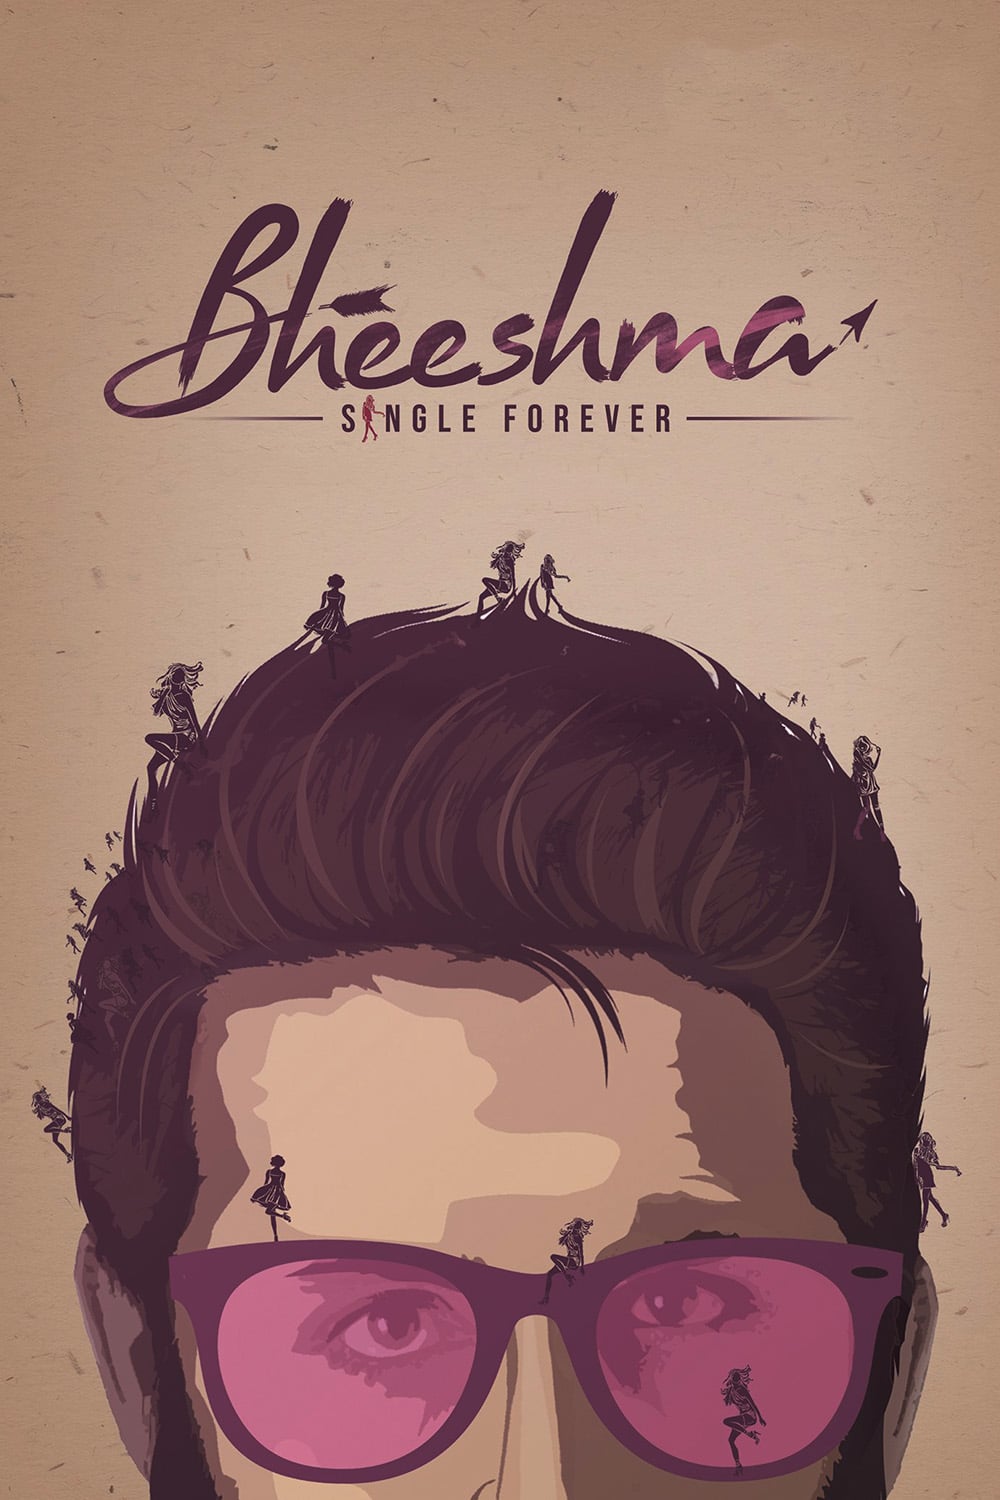 Poster for the movie "Bheeshma"